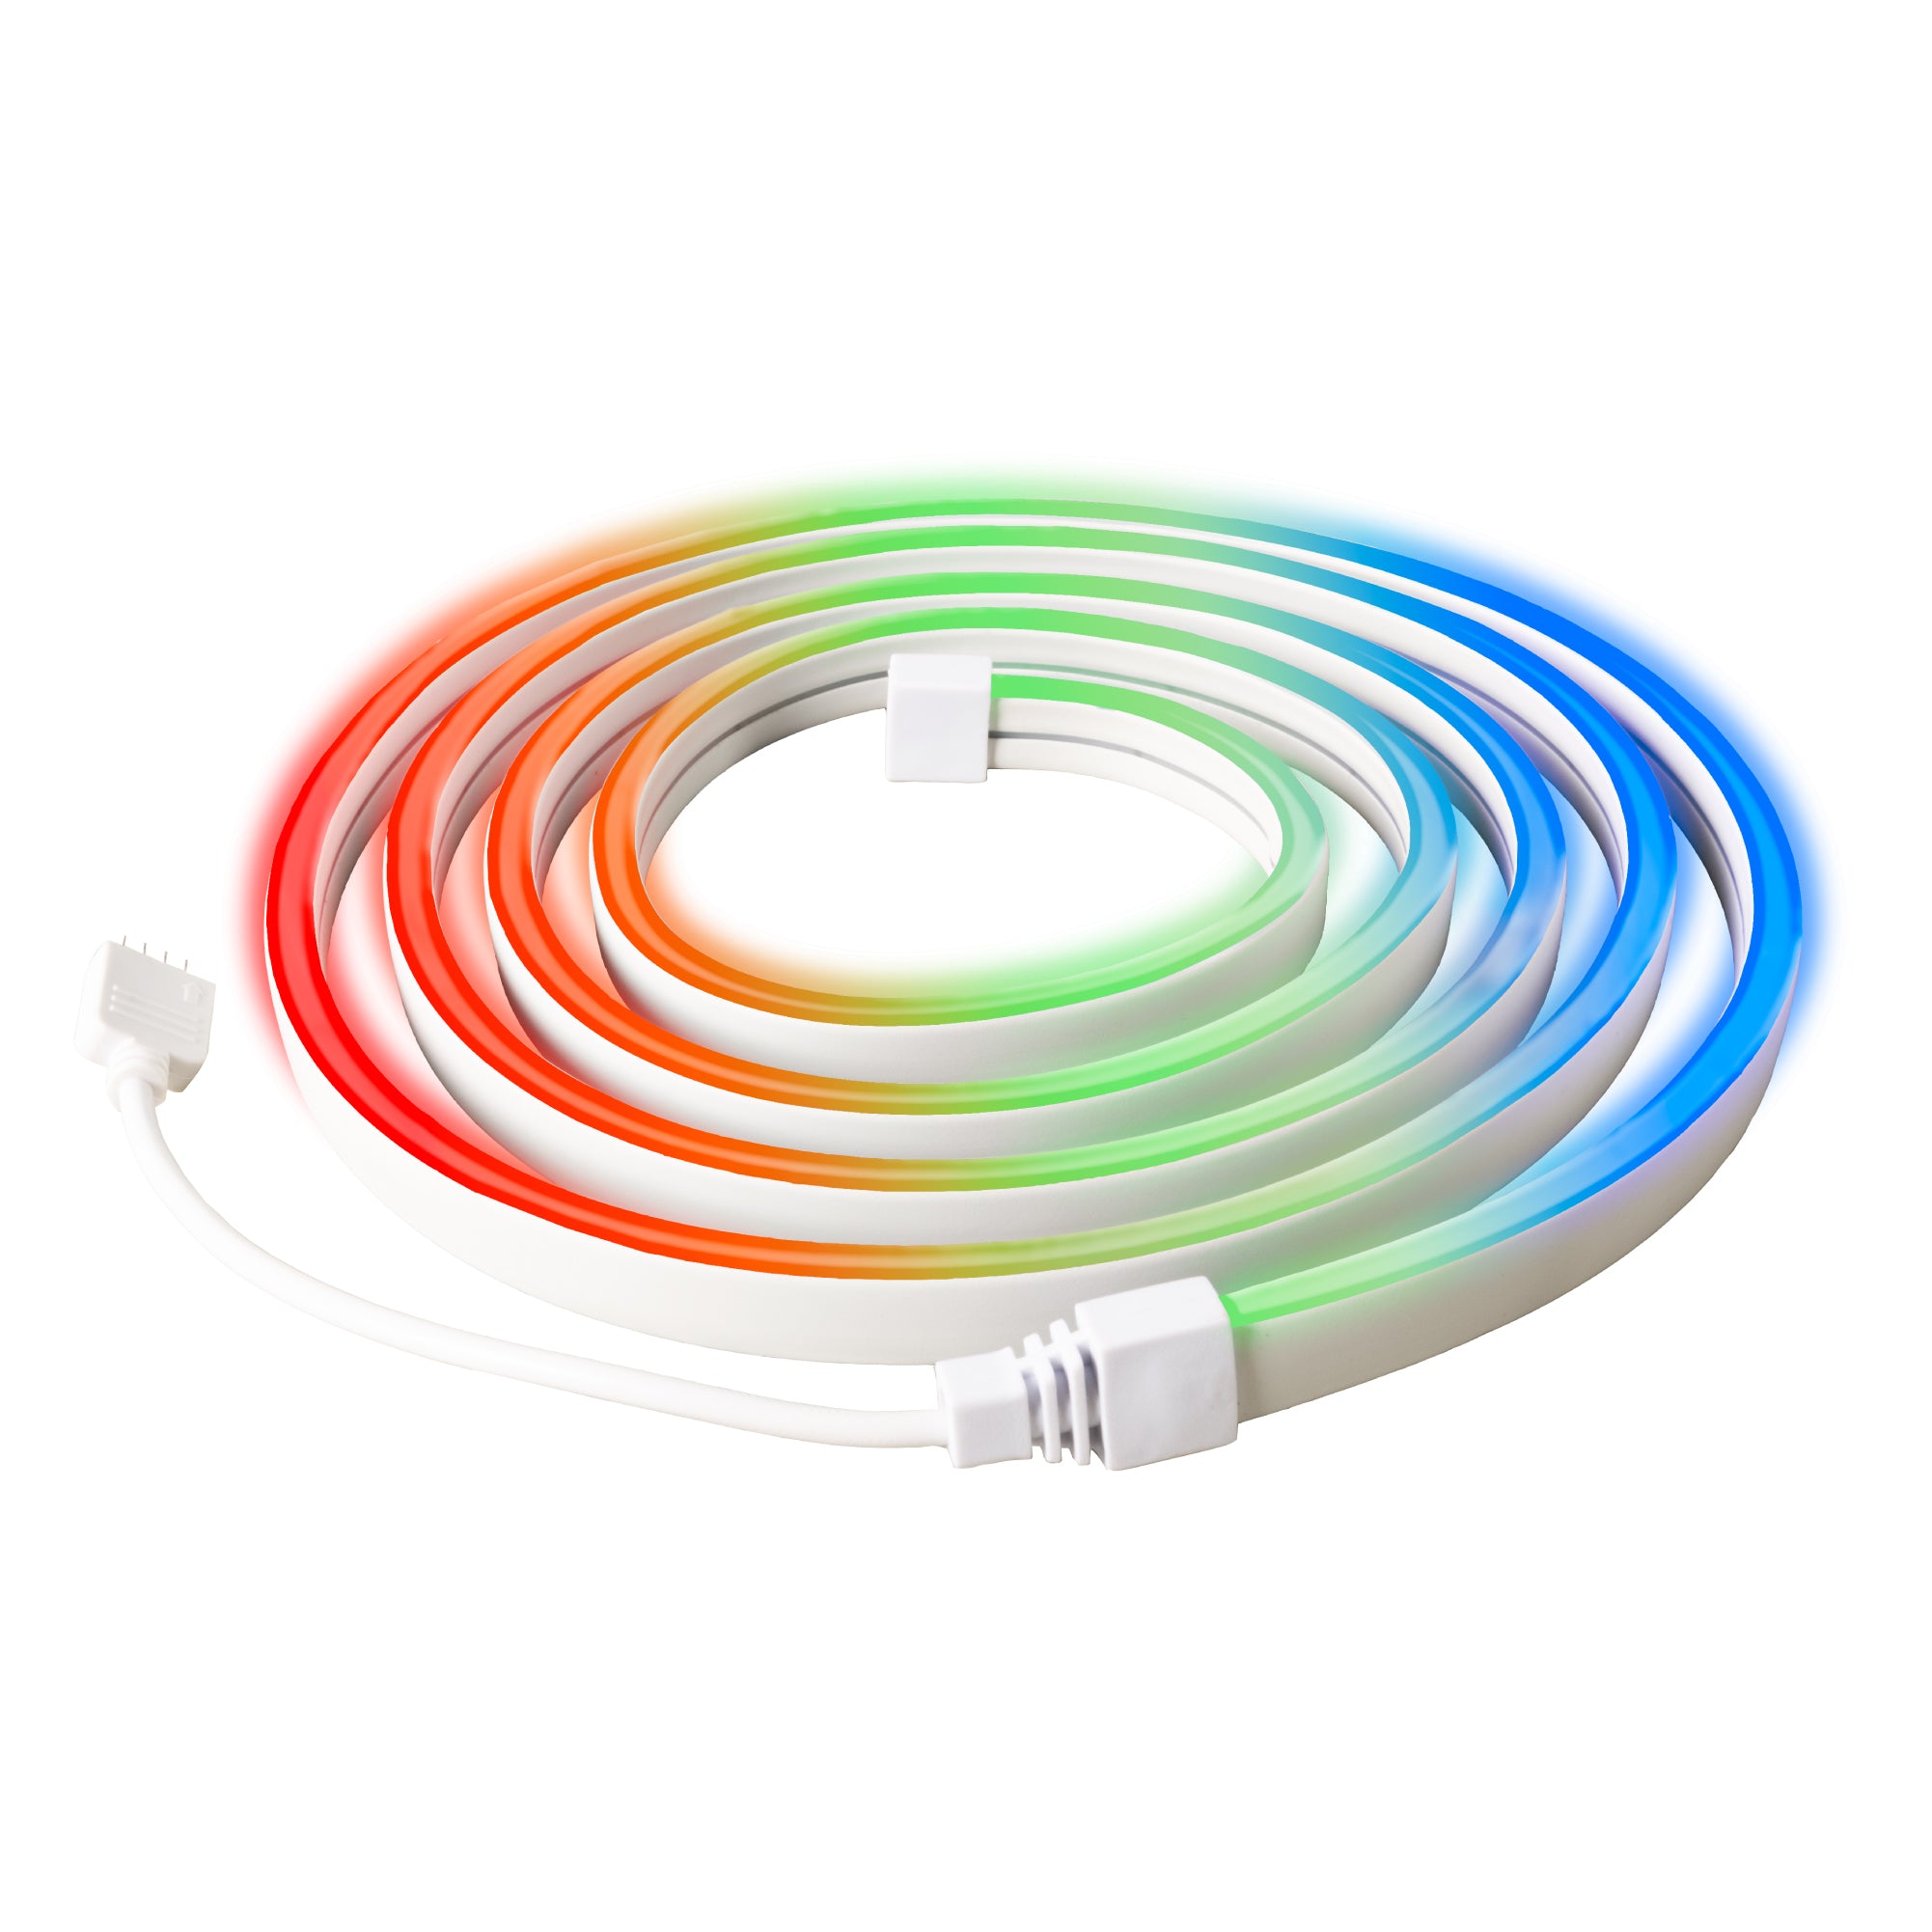 LED Strip Light - RGB Colour Changing Light with Remote